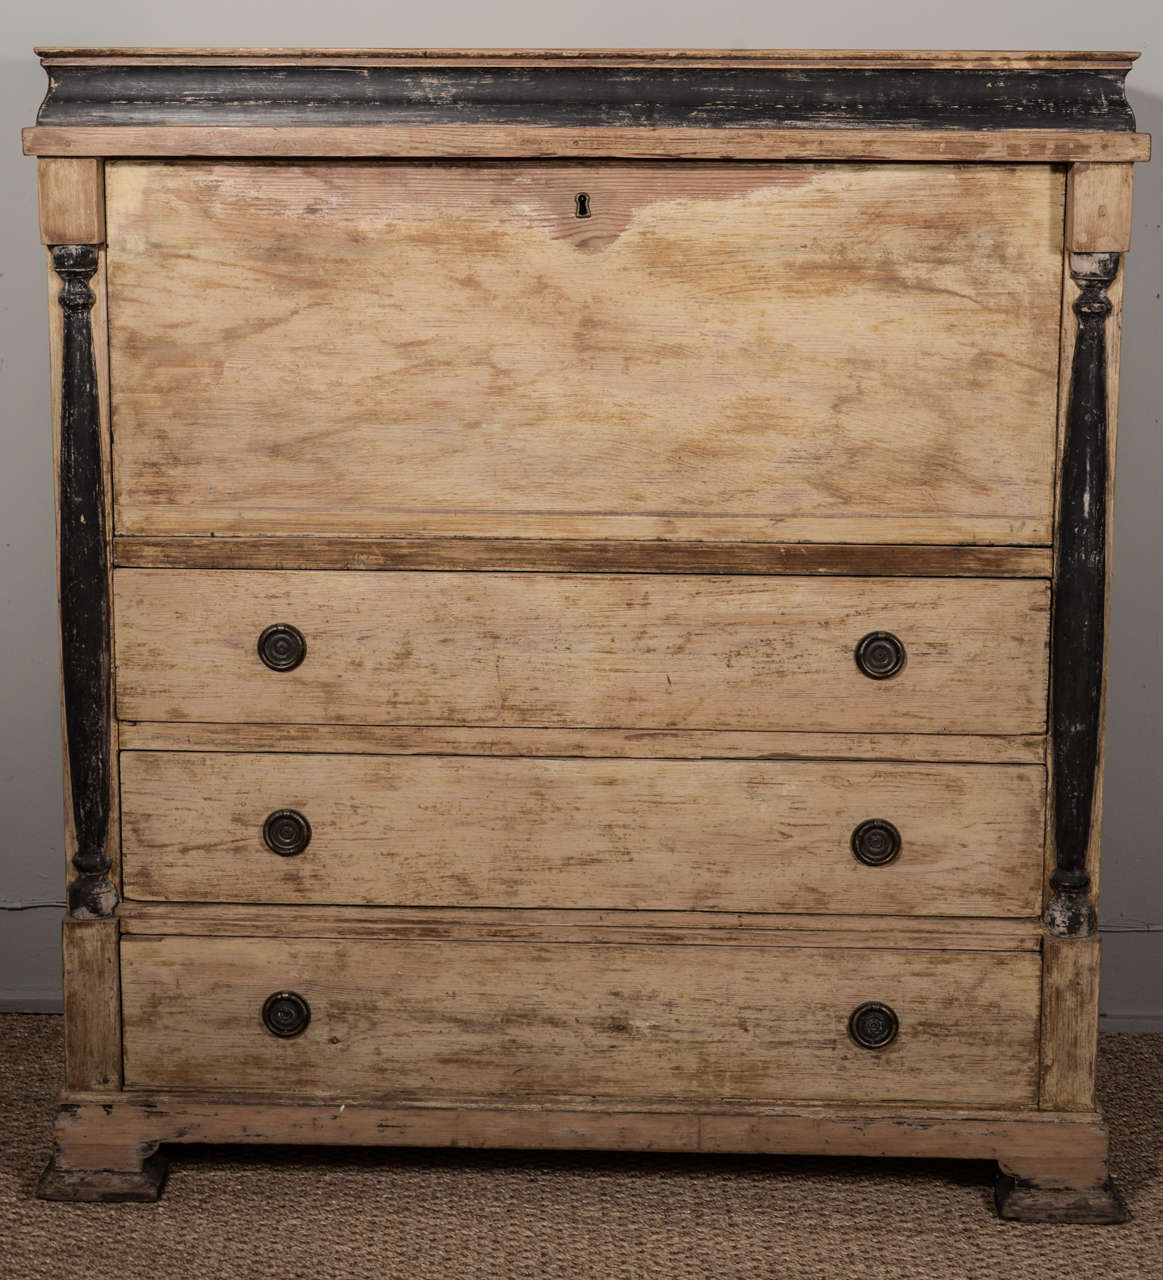 Early painted Swedish secretary desk (circa 1810-1830: drop-front reveals sixteen small compartments and wide three lower drawers. Painted finish is original with only minimal restoration to ebonized portion. Features include working lock and key,